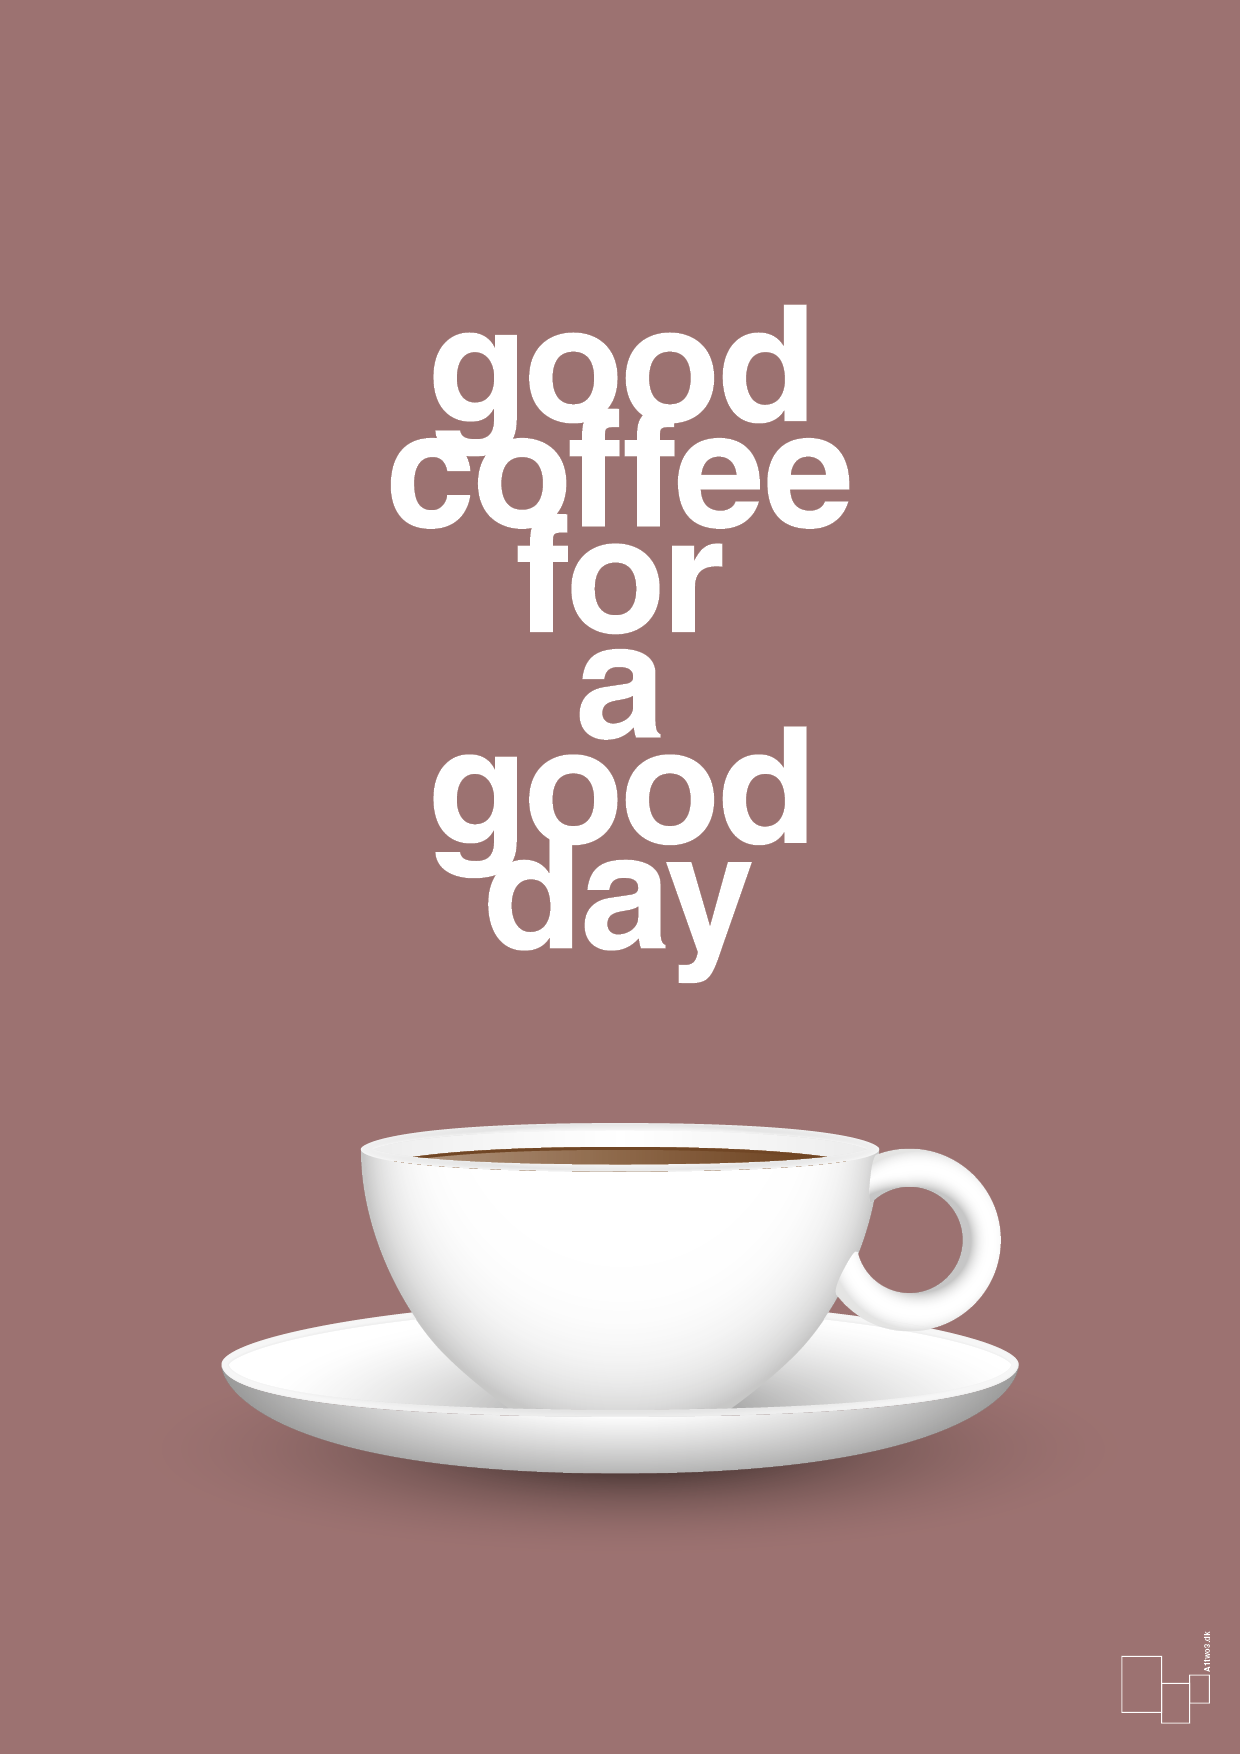 good coffee for a good day - Plakat med Mad & Drikke i Plum